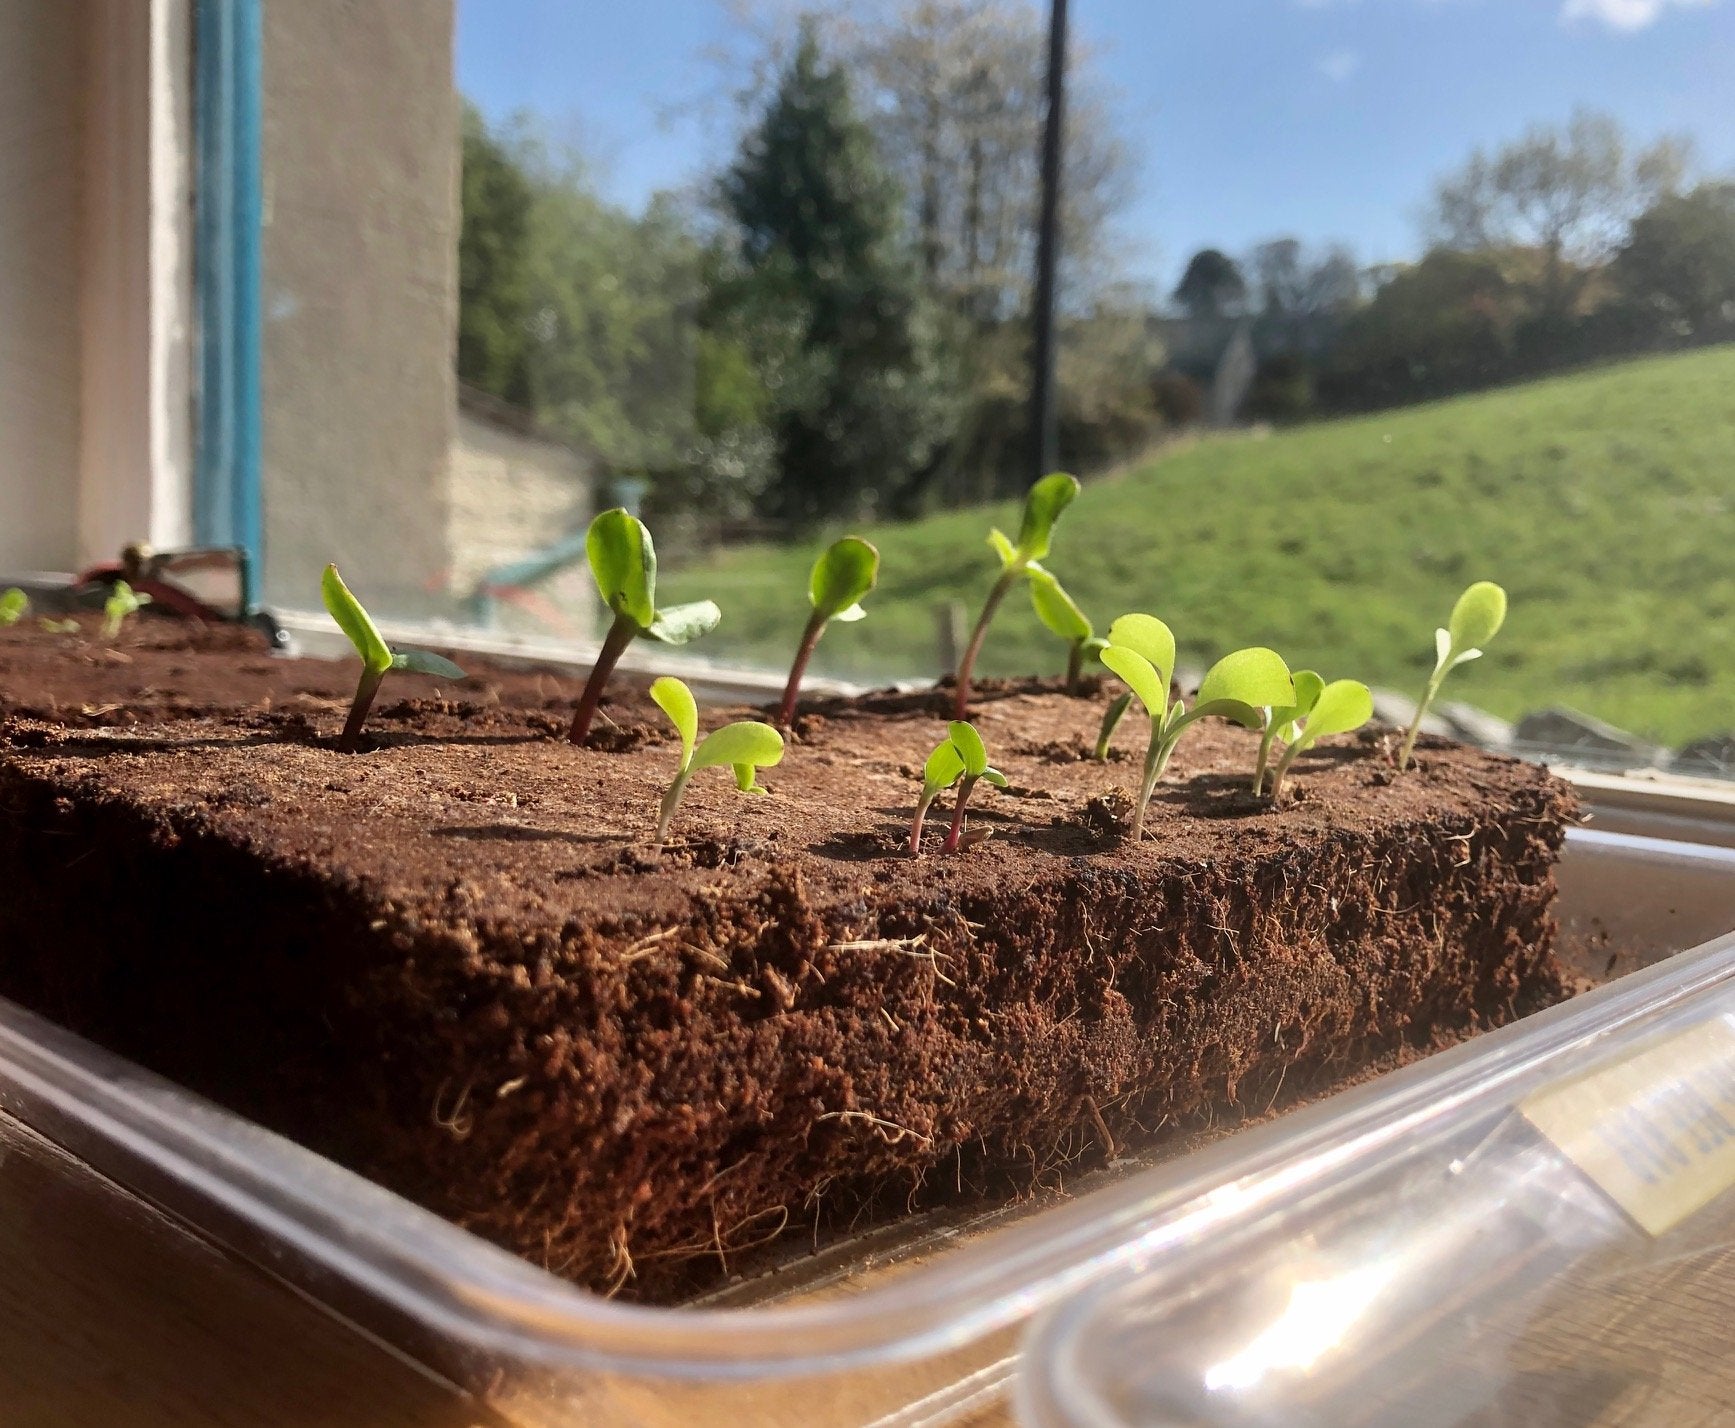 Growing Your Own! Growbars tried and tested by the team :)